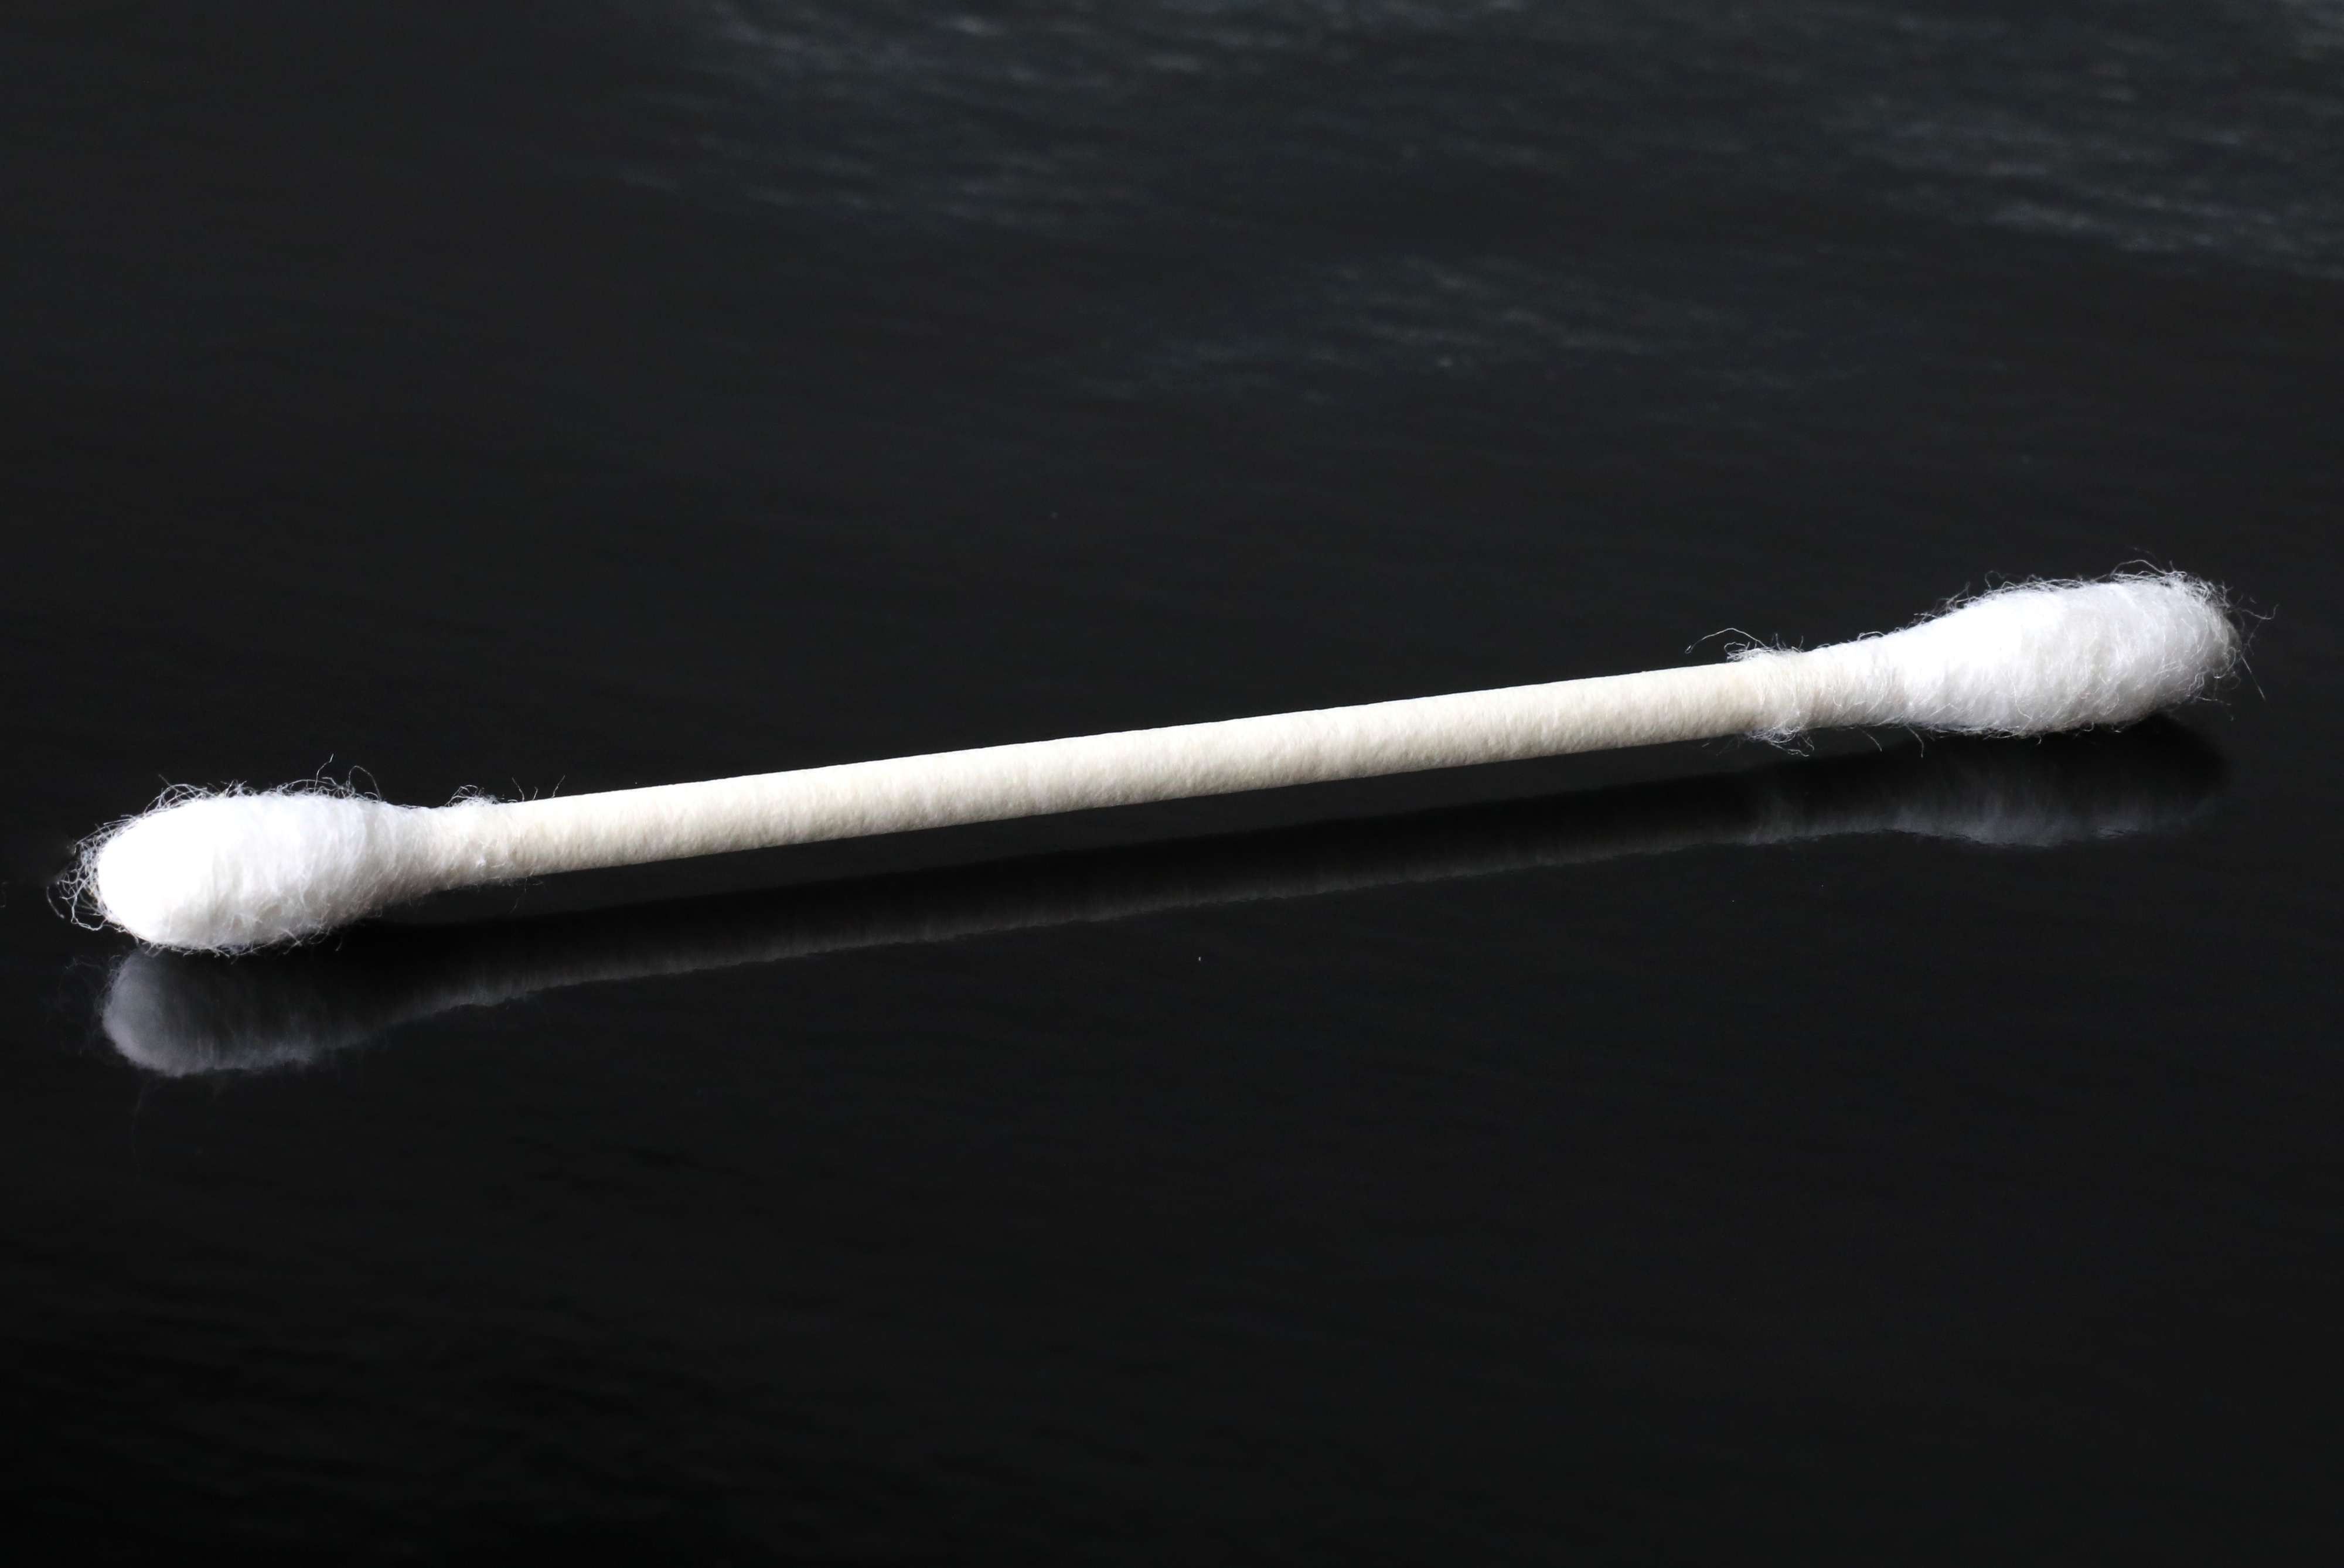 Close-up of a cotton swab on a dark background